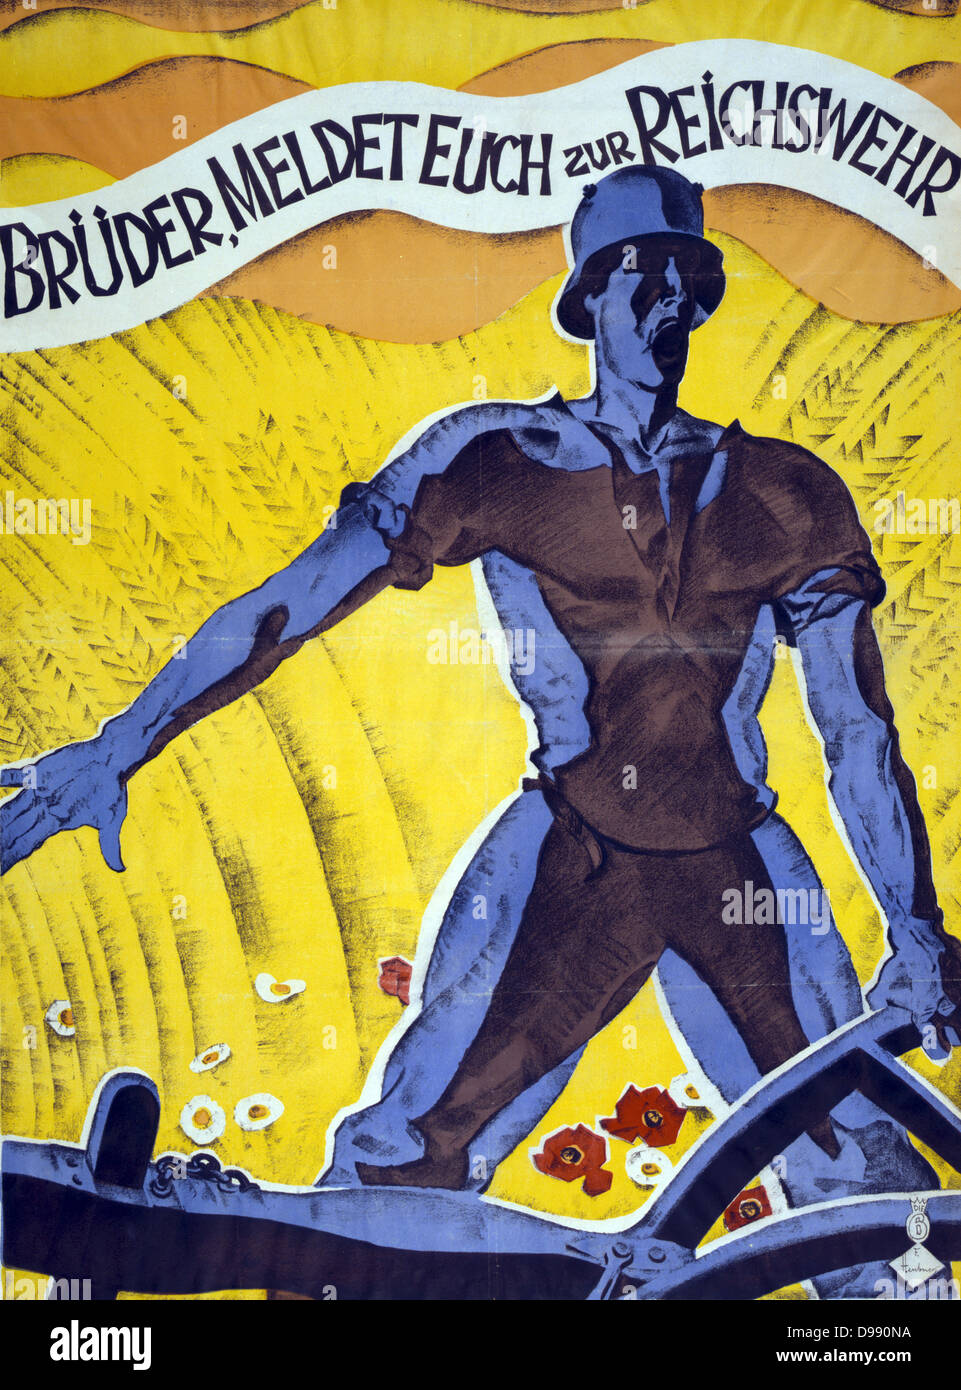 Brothers, enlist in the Reichswehr'. German poster 1920. Man in soldier's helmet holding a plough. Behind him is a field of wheat and flowers. Reichswehr (National Defence) existed from 1919-1935 when it became the Wehrmacht. Stock Photo